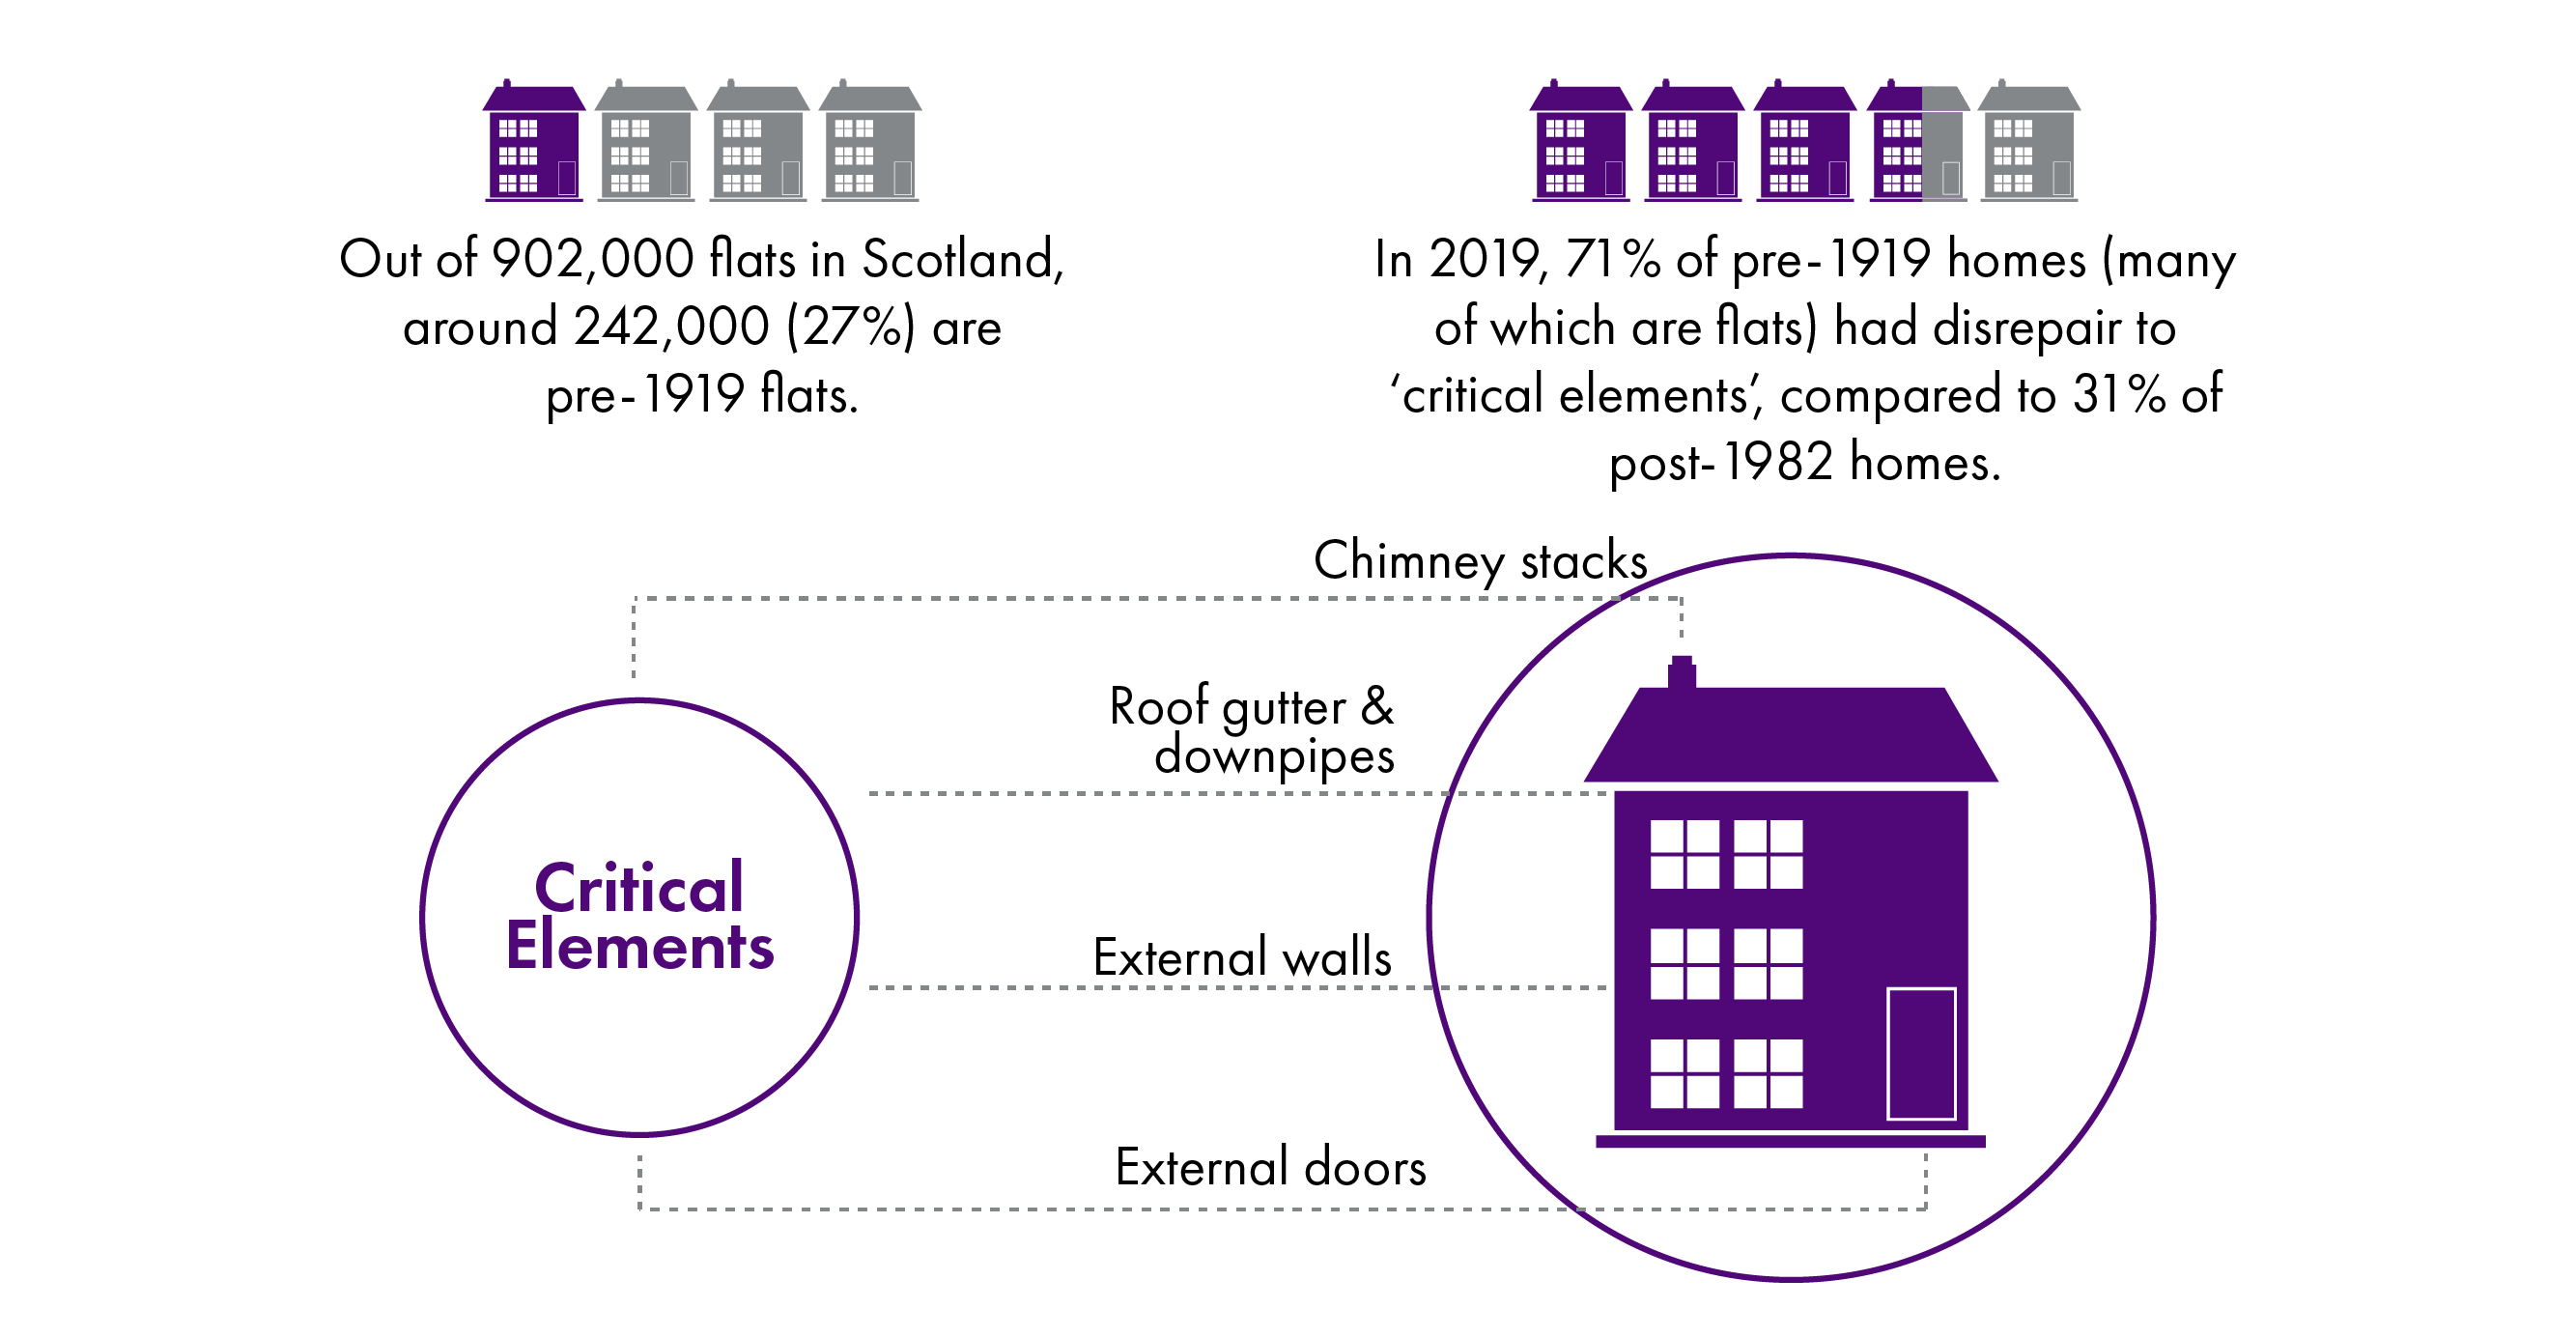 71% of pre-1919 homes, many of which contain flats, have disrepair to 'critical elements', compared to 31% of post-1982 homes